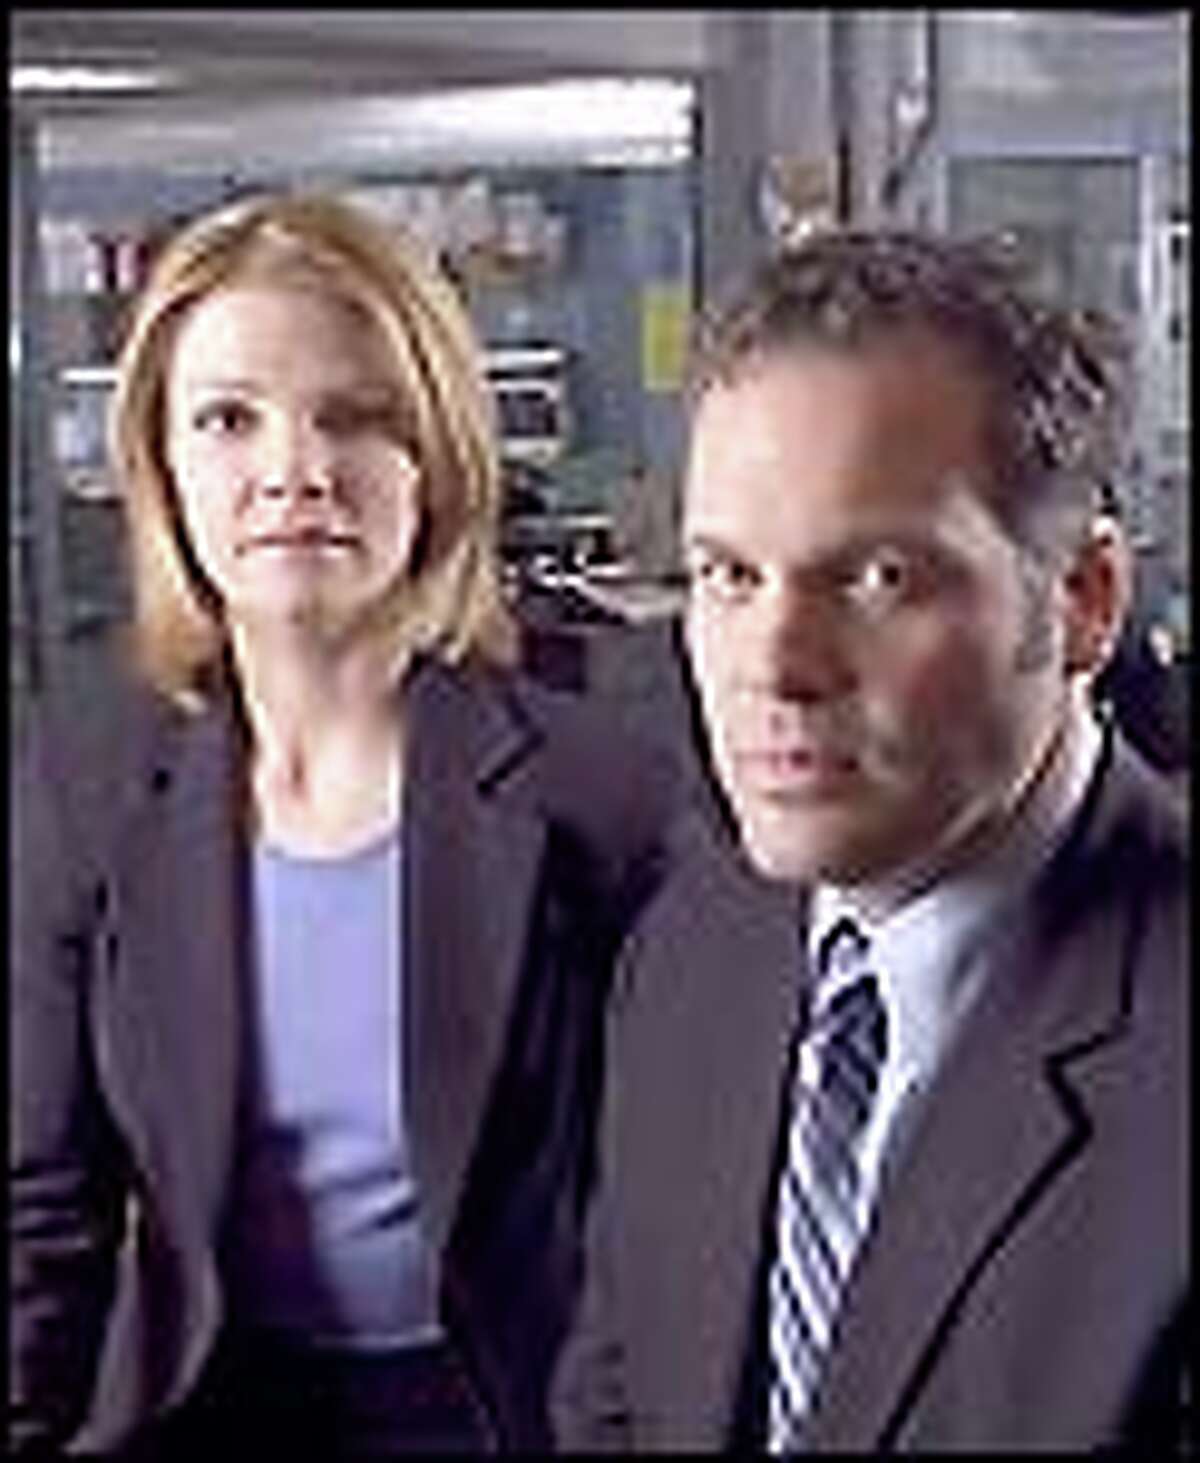 The latest "Law & Order's" cast includes Kathryn Erbe as Detective Alexandra Eames and Vincent D’Onofrio as Detective Robert Goren.